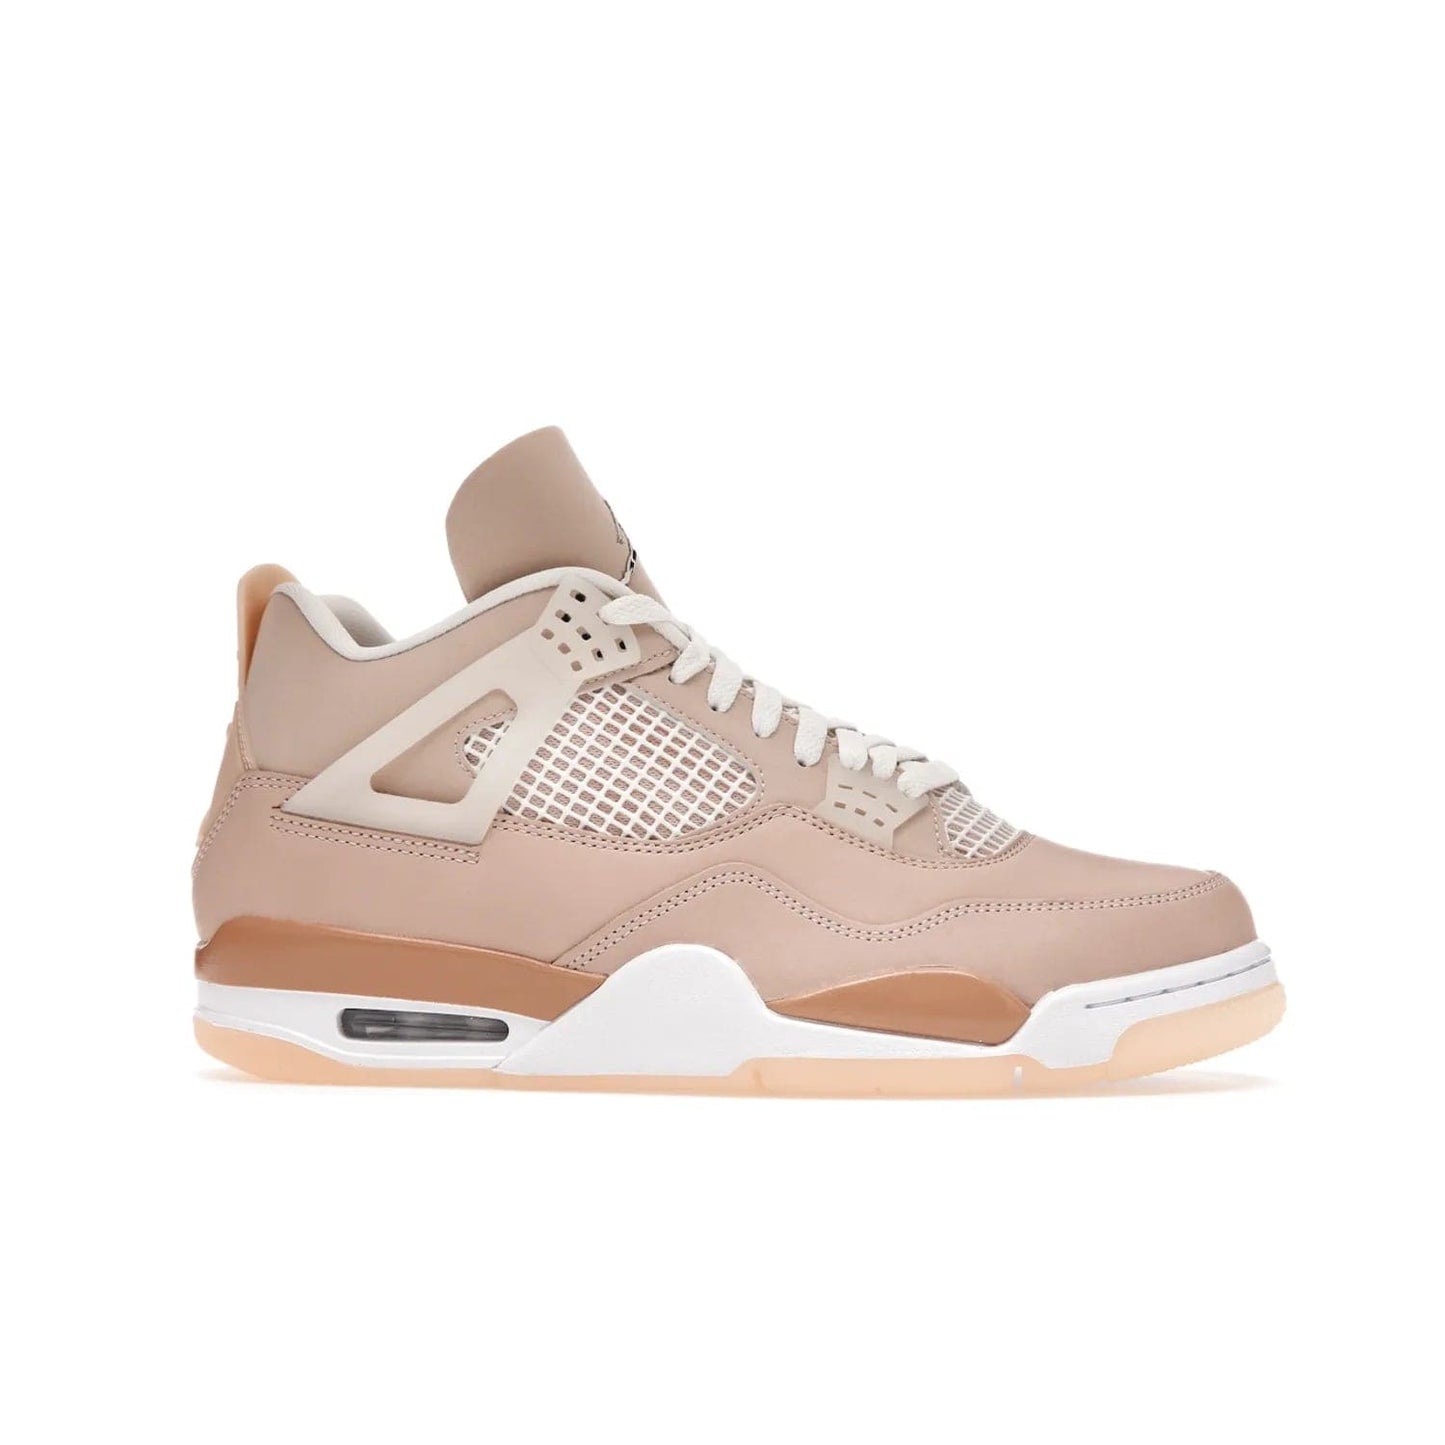 Jordan 4 Retro Shimmer (Women's) - Image 2 - Only at www.BallersClubKickz.com - Air Jordan 4 Shimmer (W): A women's-exclusive design with a buttery beige upper and Silver/Orange Bronze details. Durabuck and metallic Jumpman branding elevate the iconic silhouette. Shop now.